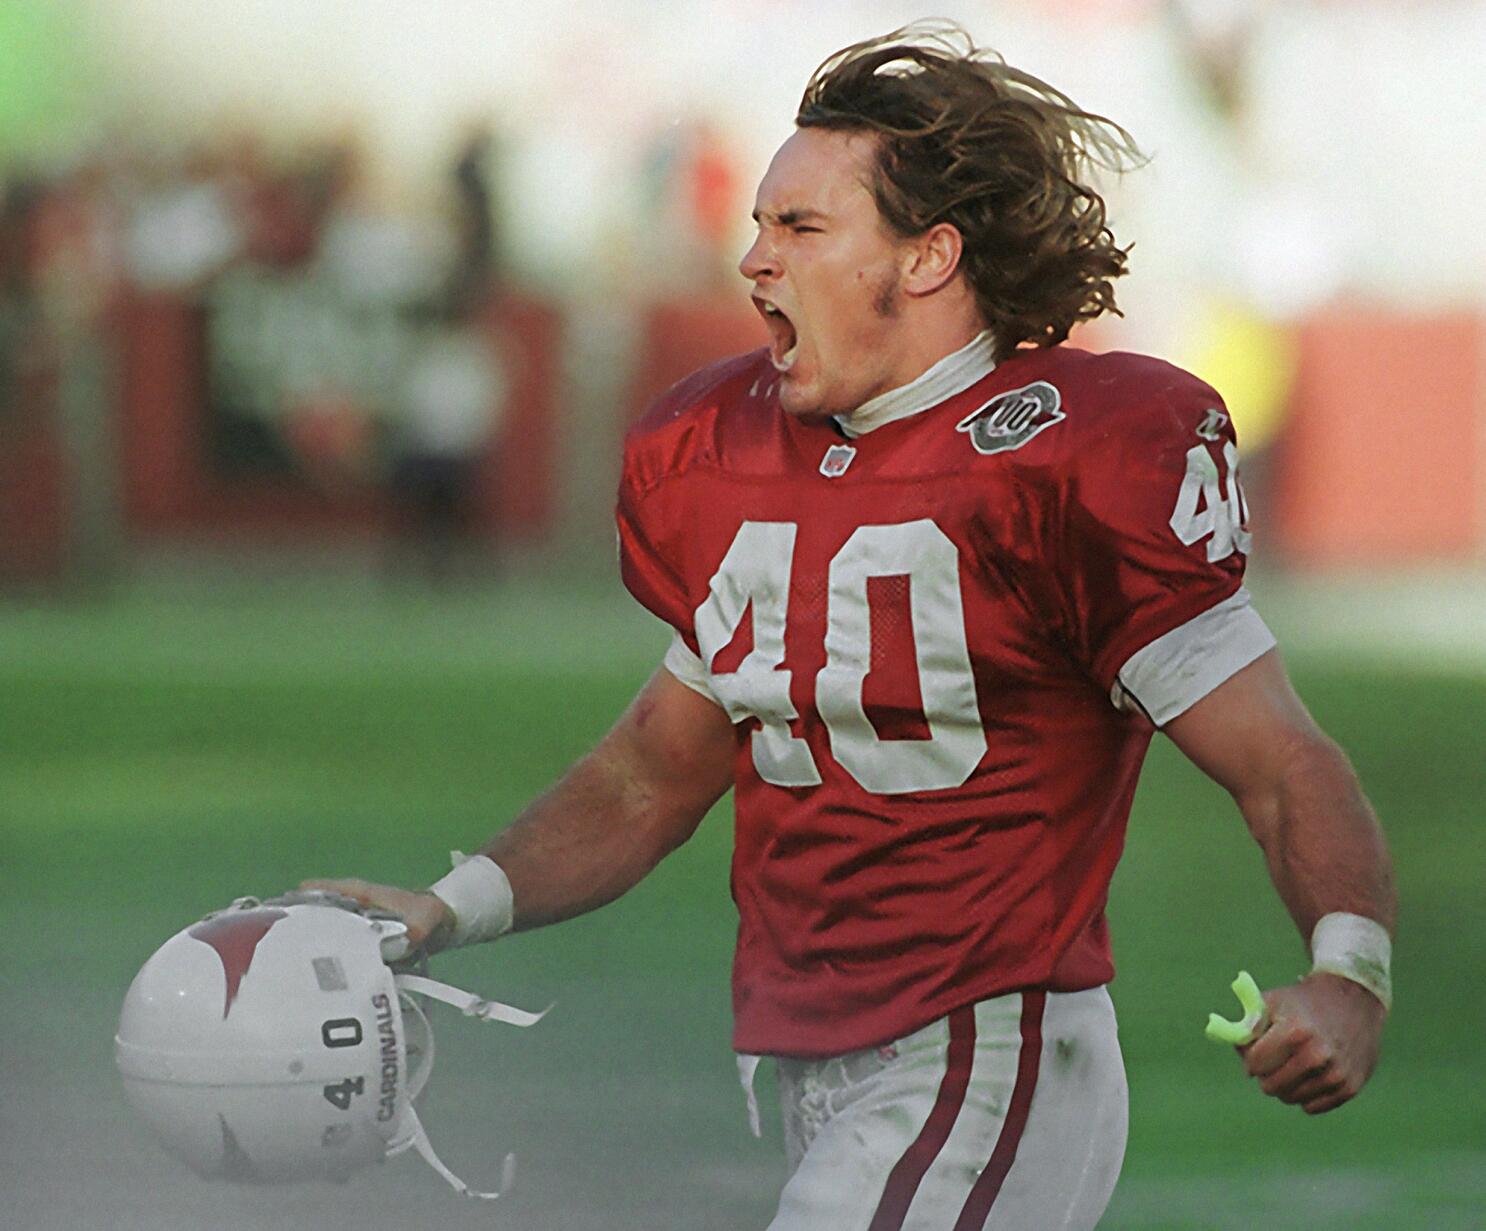 Stanford will play an Arizona State team inspired by Pat Tillman